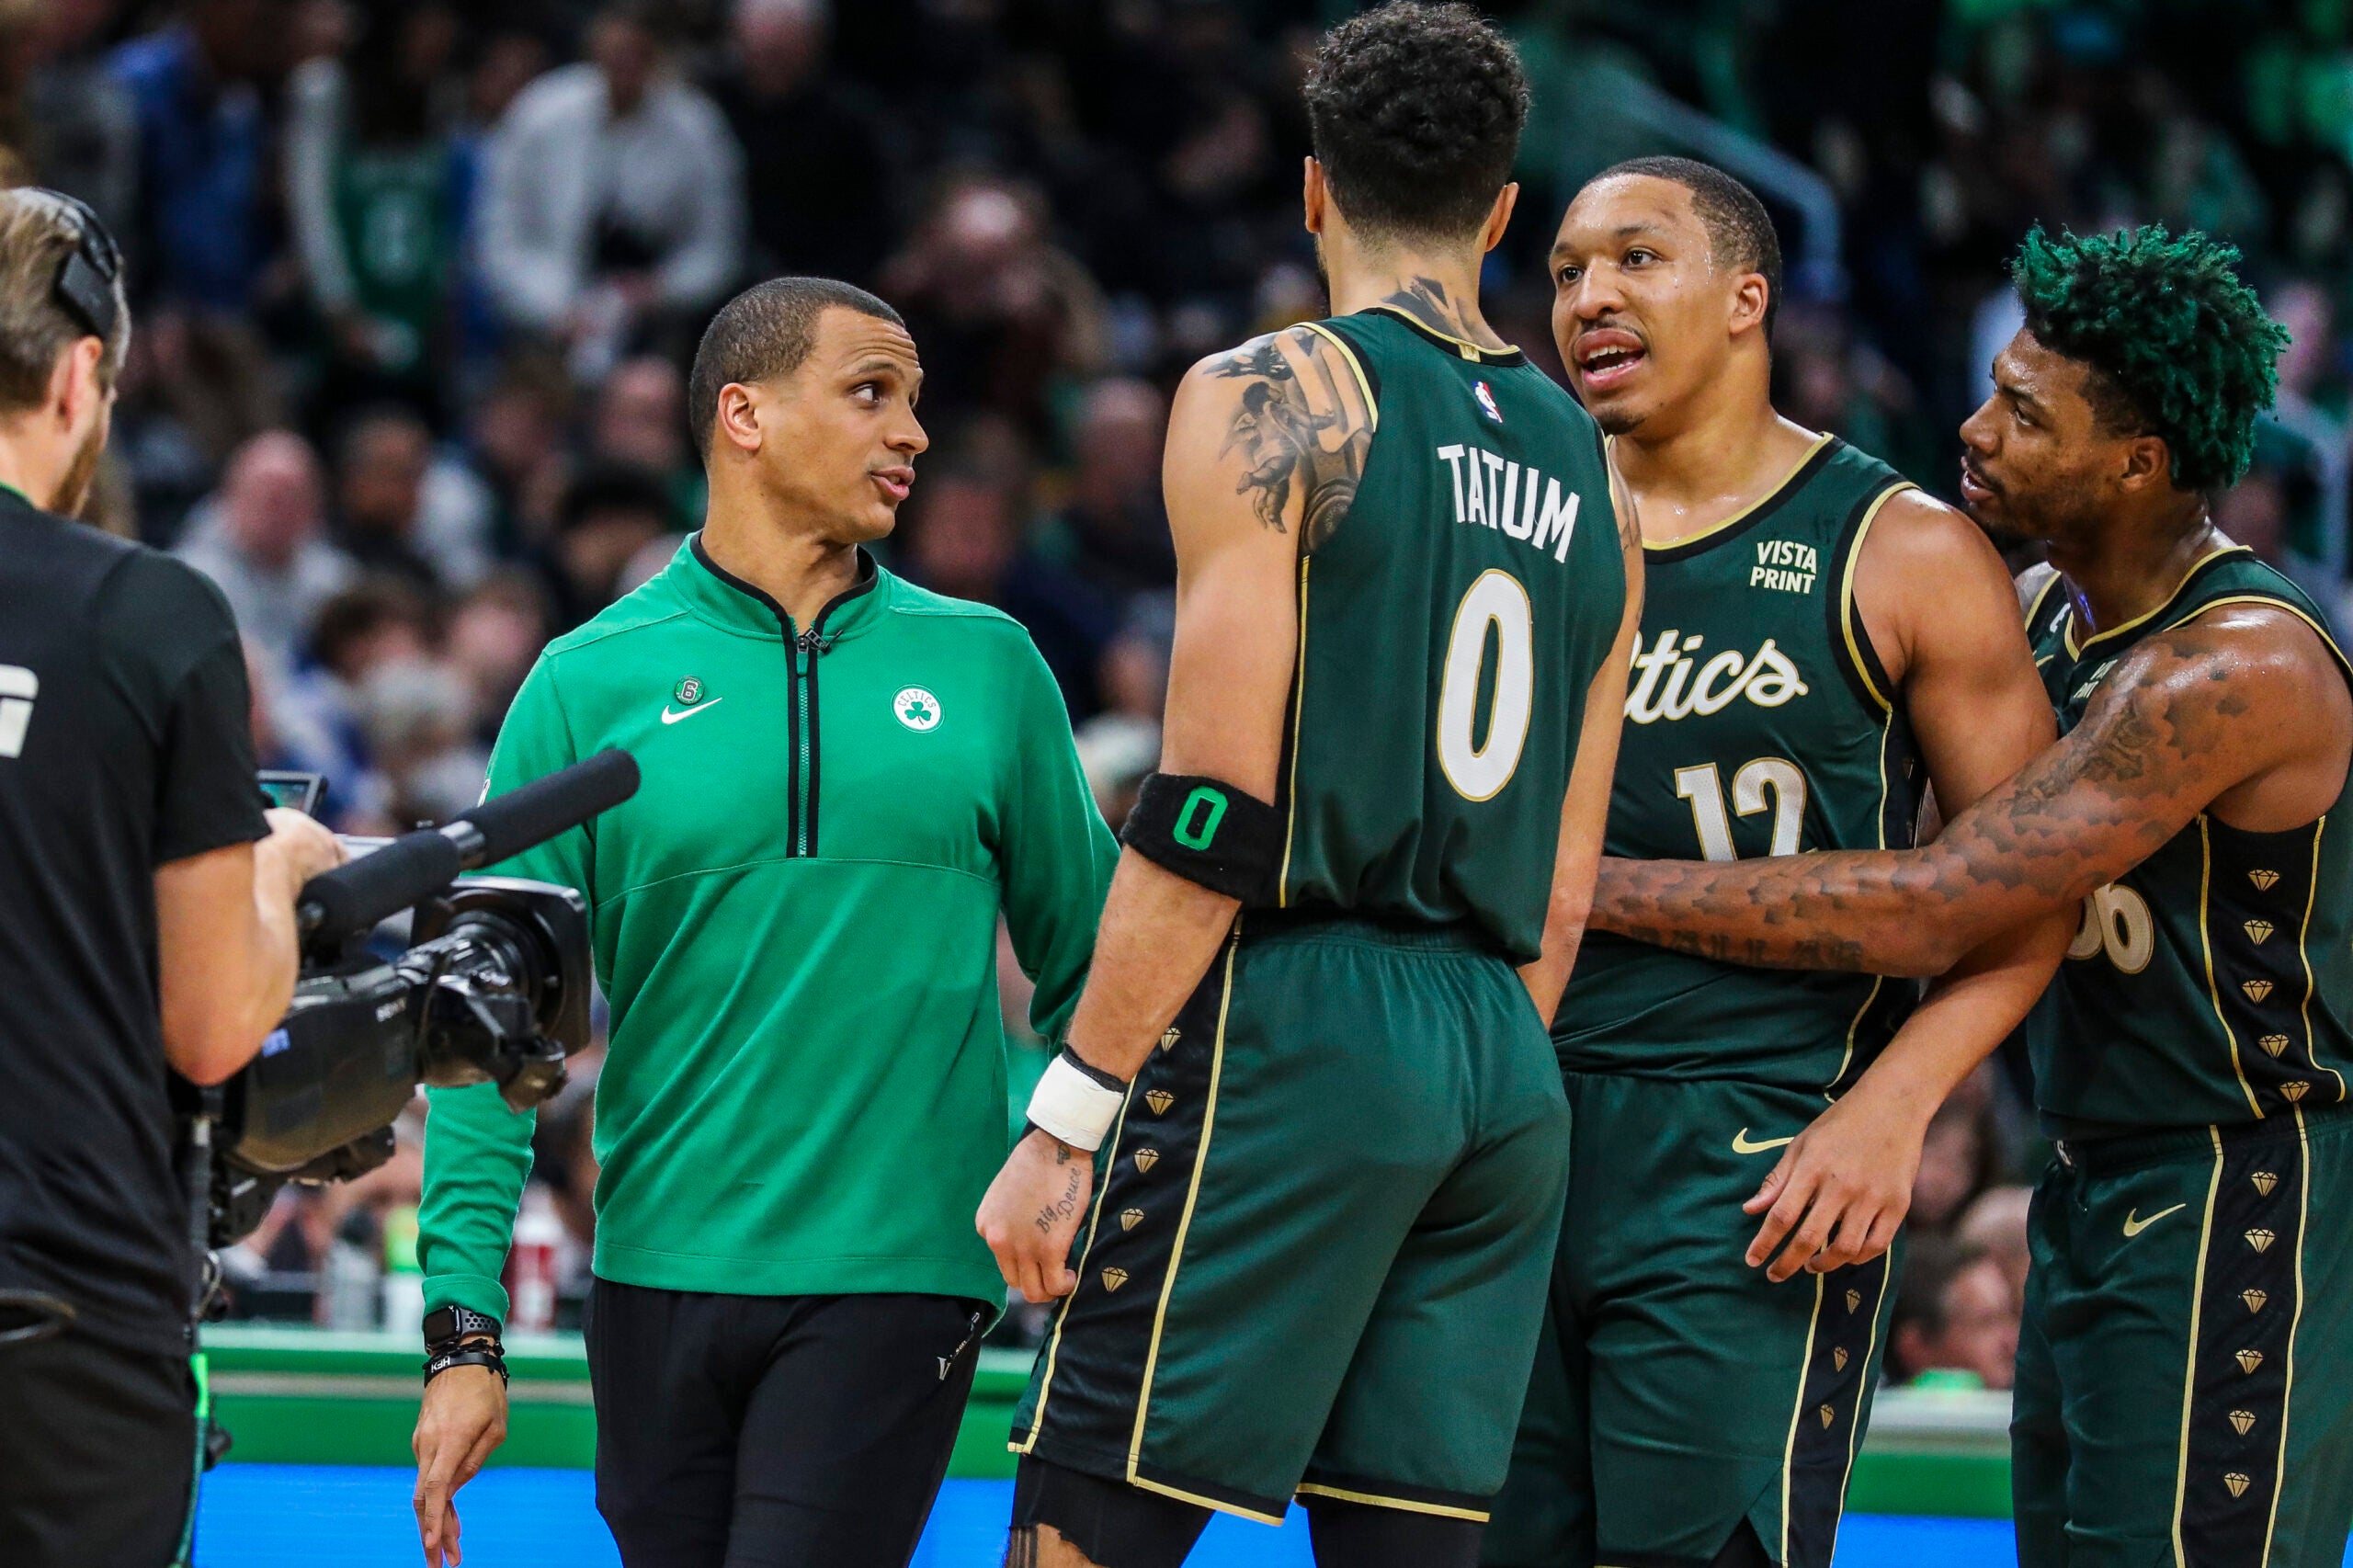 BOSTON, MA - 11/23/2022 Celtics Coach Joe Mazzulla talks to Boston Celtics forward Jayson Tatum (0), Boston Celtics forward Grant Williams (12) and Boston Celtics guard Marcus Smart (36) during a time out in the fourth quarter of Wednesday’s game at TD Garden.